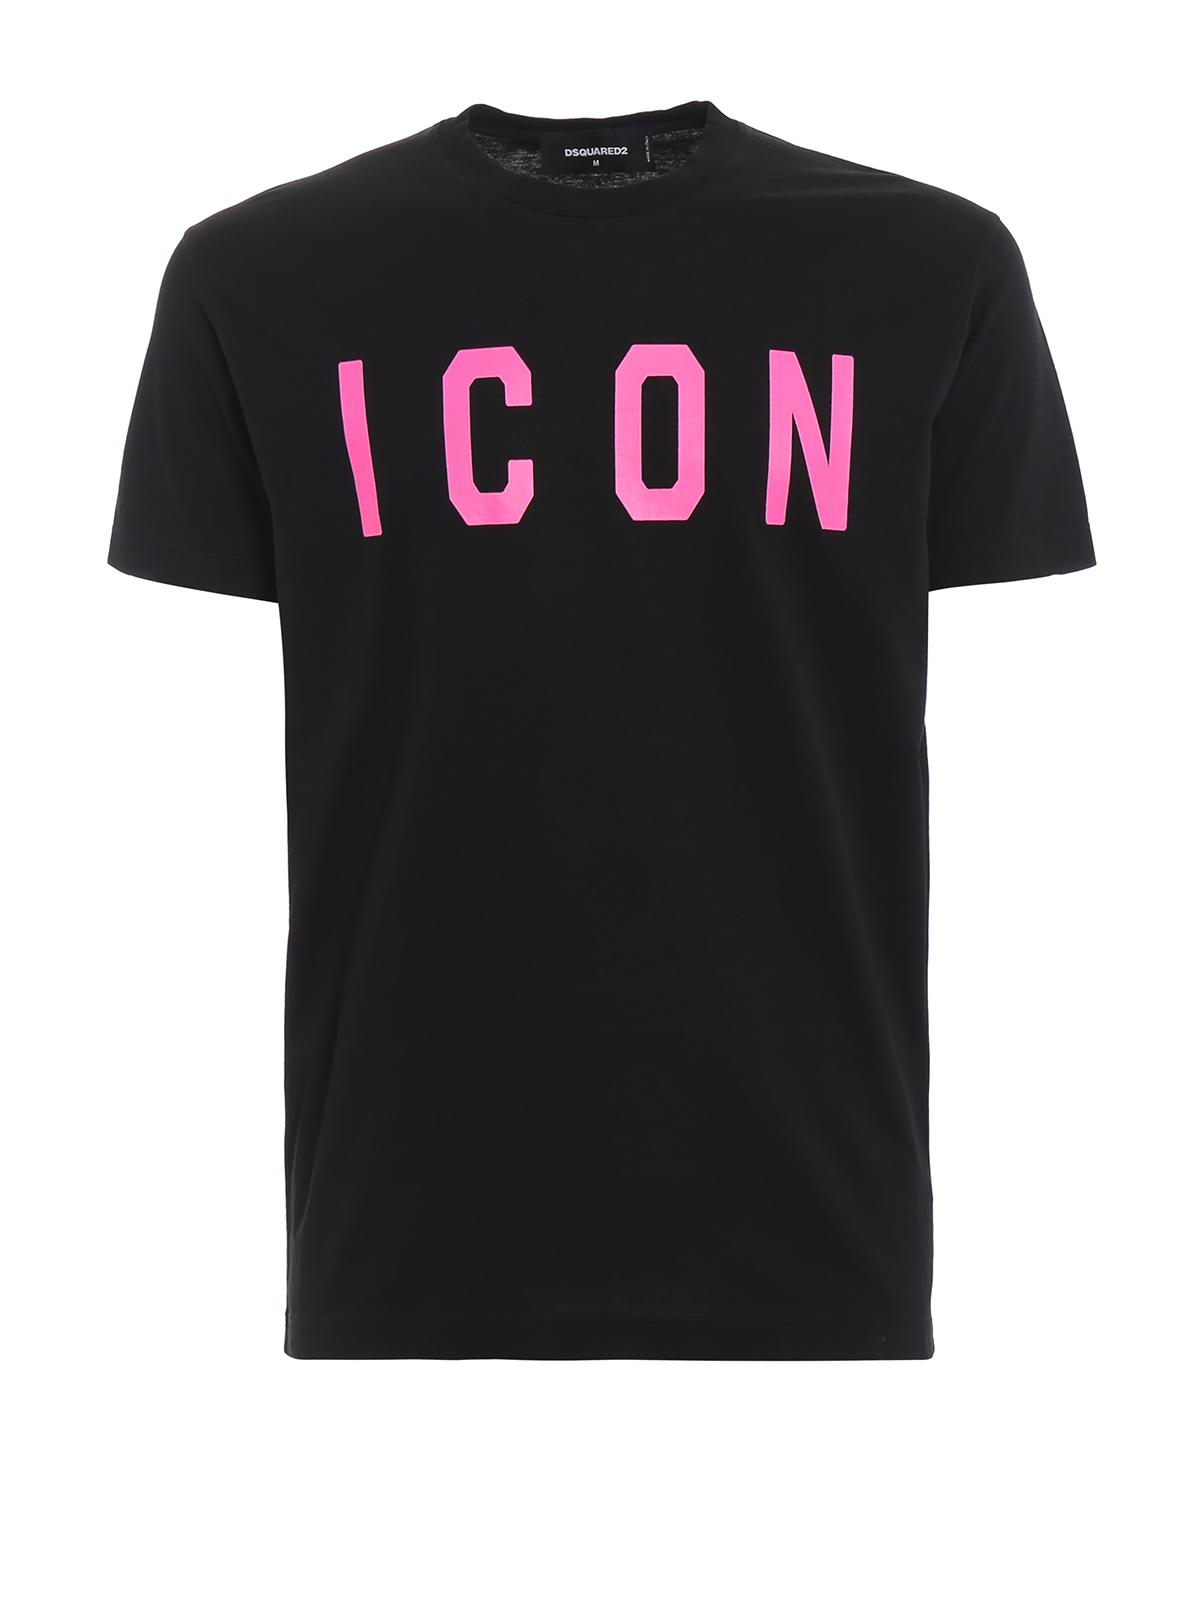 dsquared2 t shirt icon